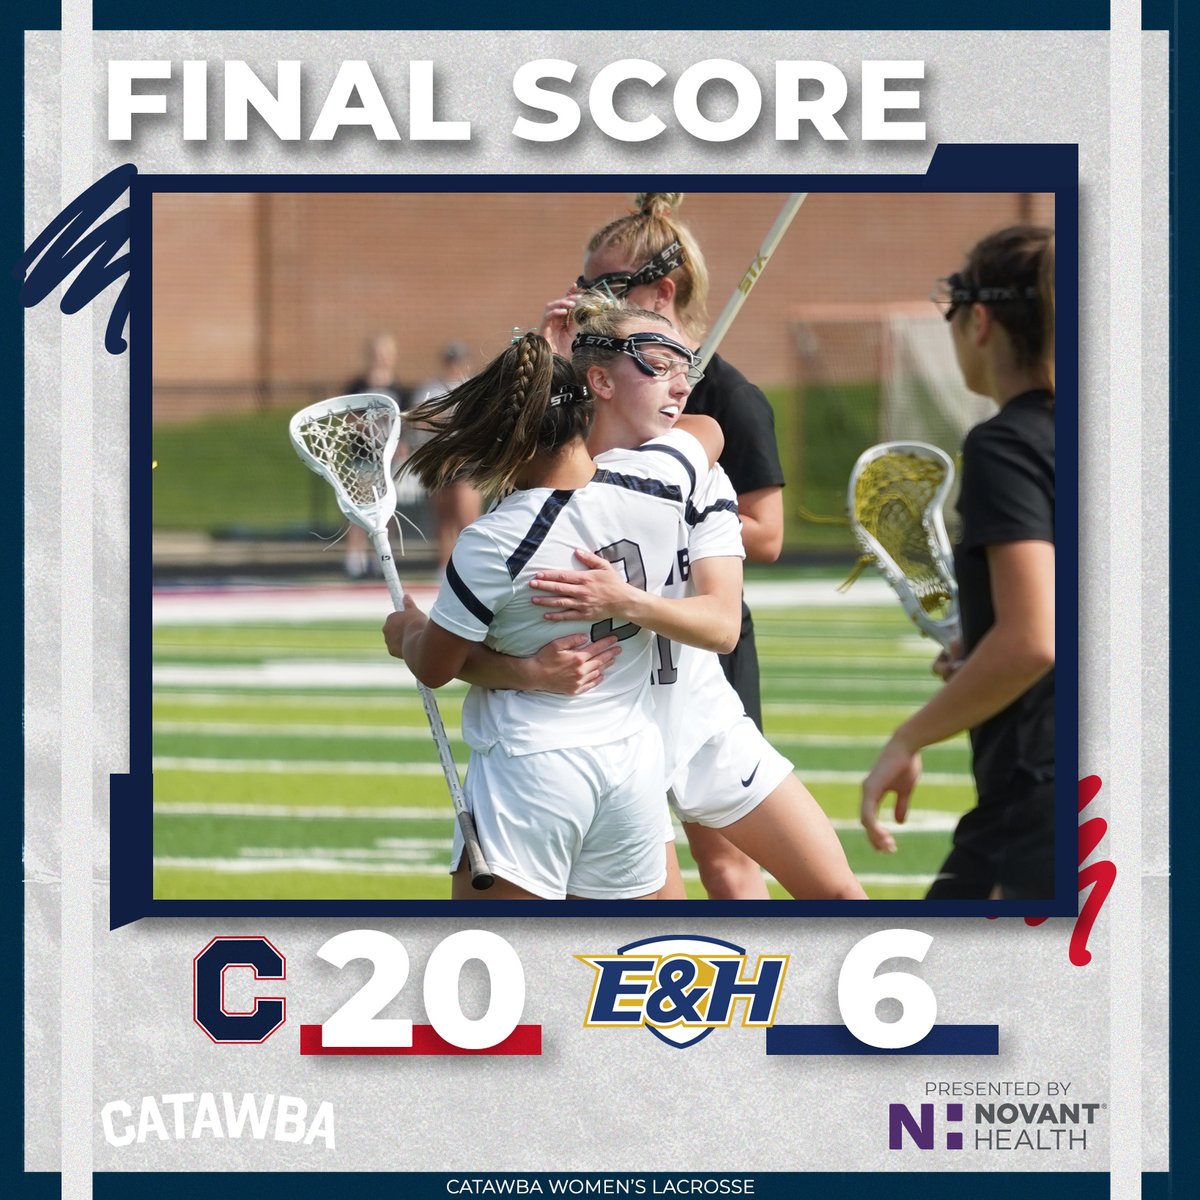 Catawba Wins! @catwlax takes down Emory & Henry behind 4 goals from Abby Shuren & Ella McCusker. Back in action Saturday for Senior Day!